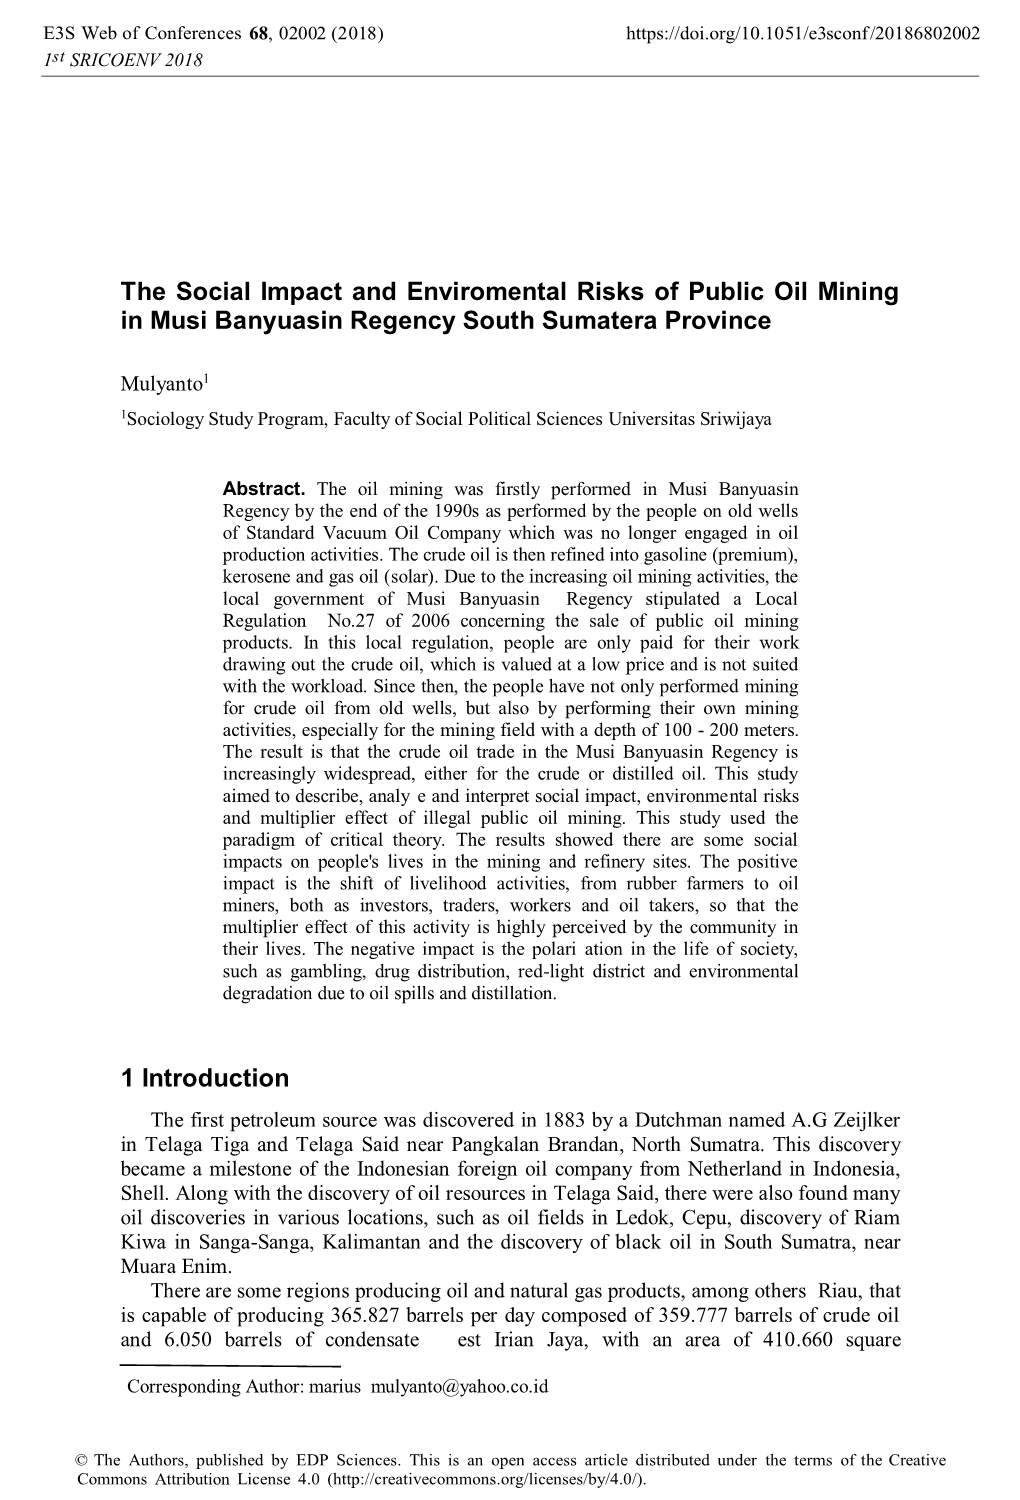 The Social Impact and Enviromental Risks of Public Oil Mining in Musi Banyuasin Regency South Sumatera Province